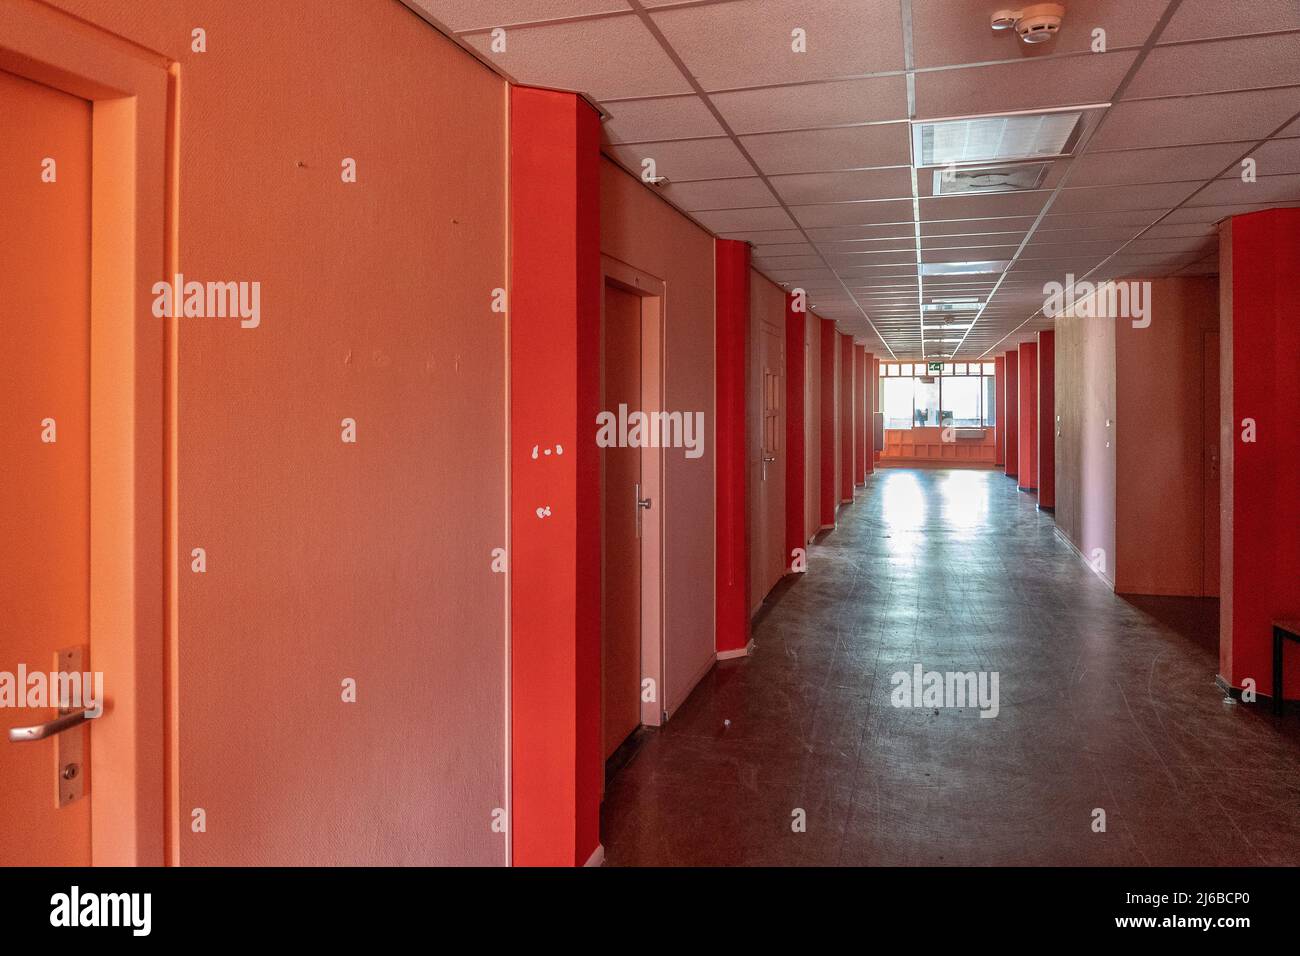 AMSTERDAM/NETHERLANDS-FEBRUARY 24: An empty corridor of a prison with tiles on the floor and open steel cell doors on which texts are scratched The ce Stock Photo